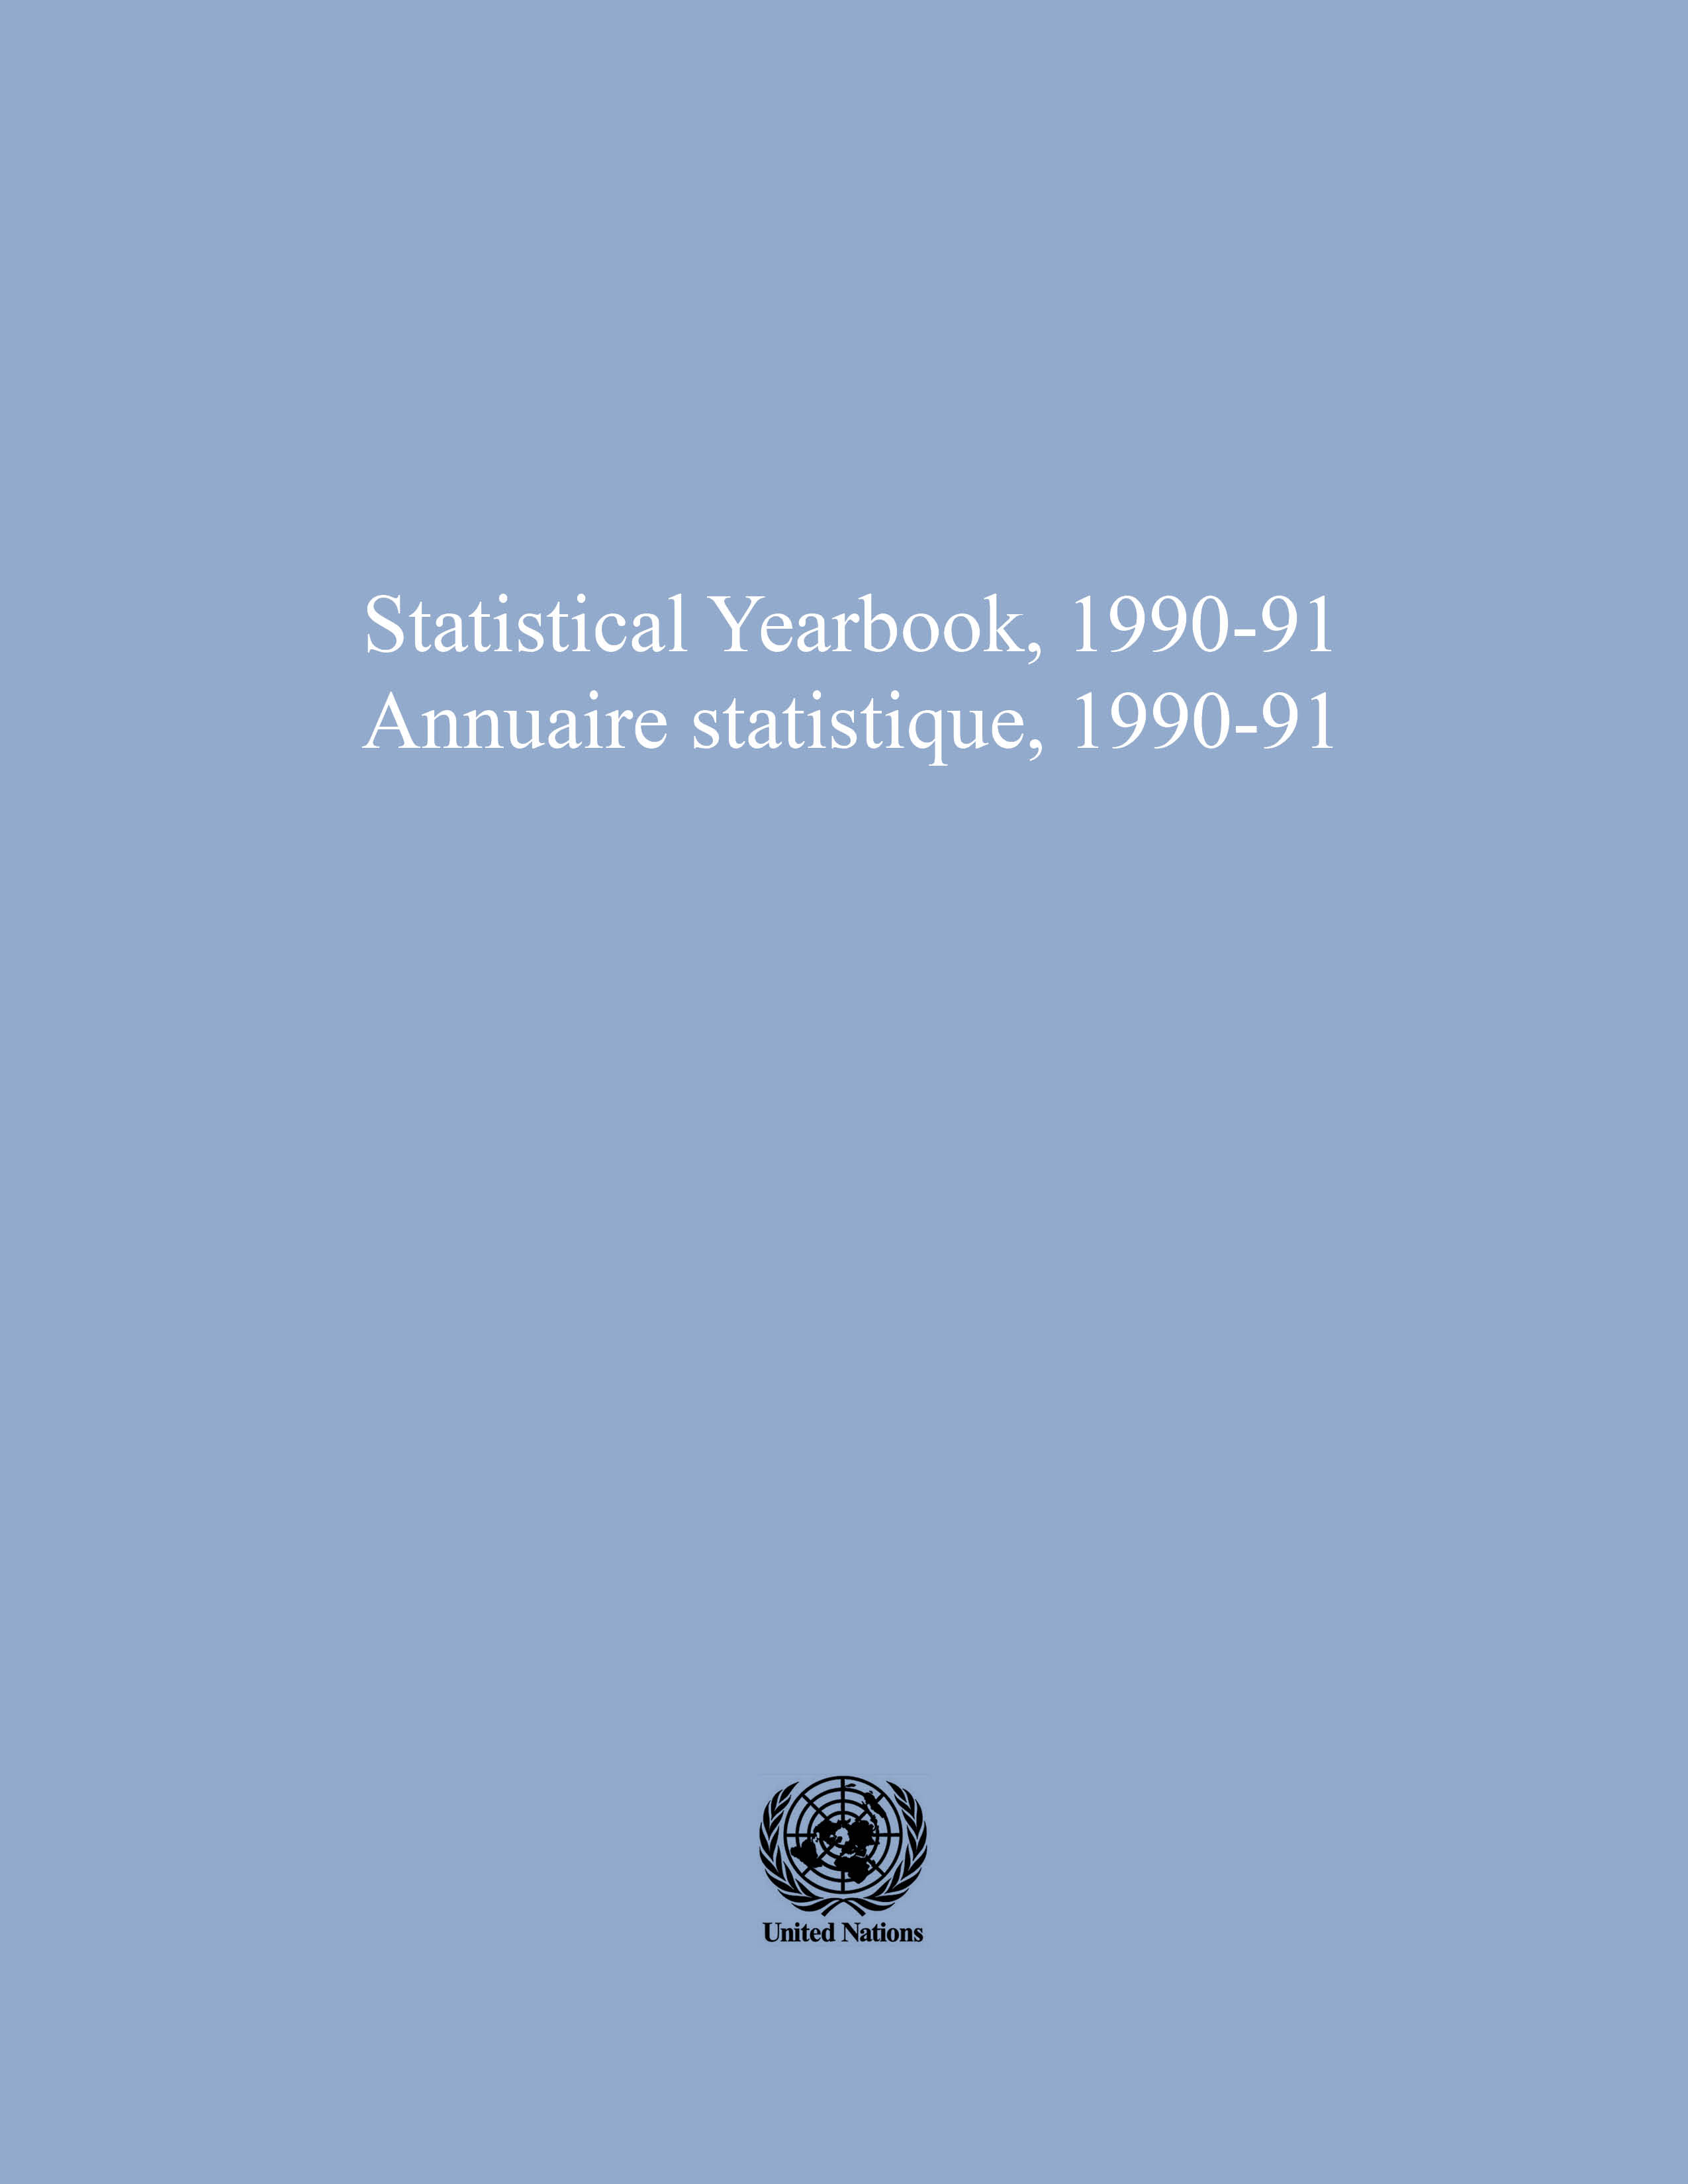 image of Statistical Yearbook 1990-1991, Thirty-eighth Issue